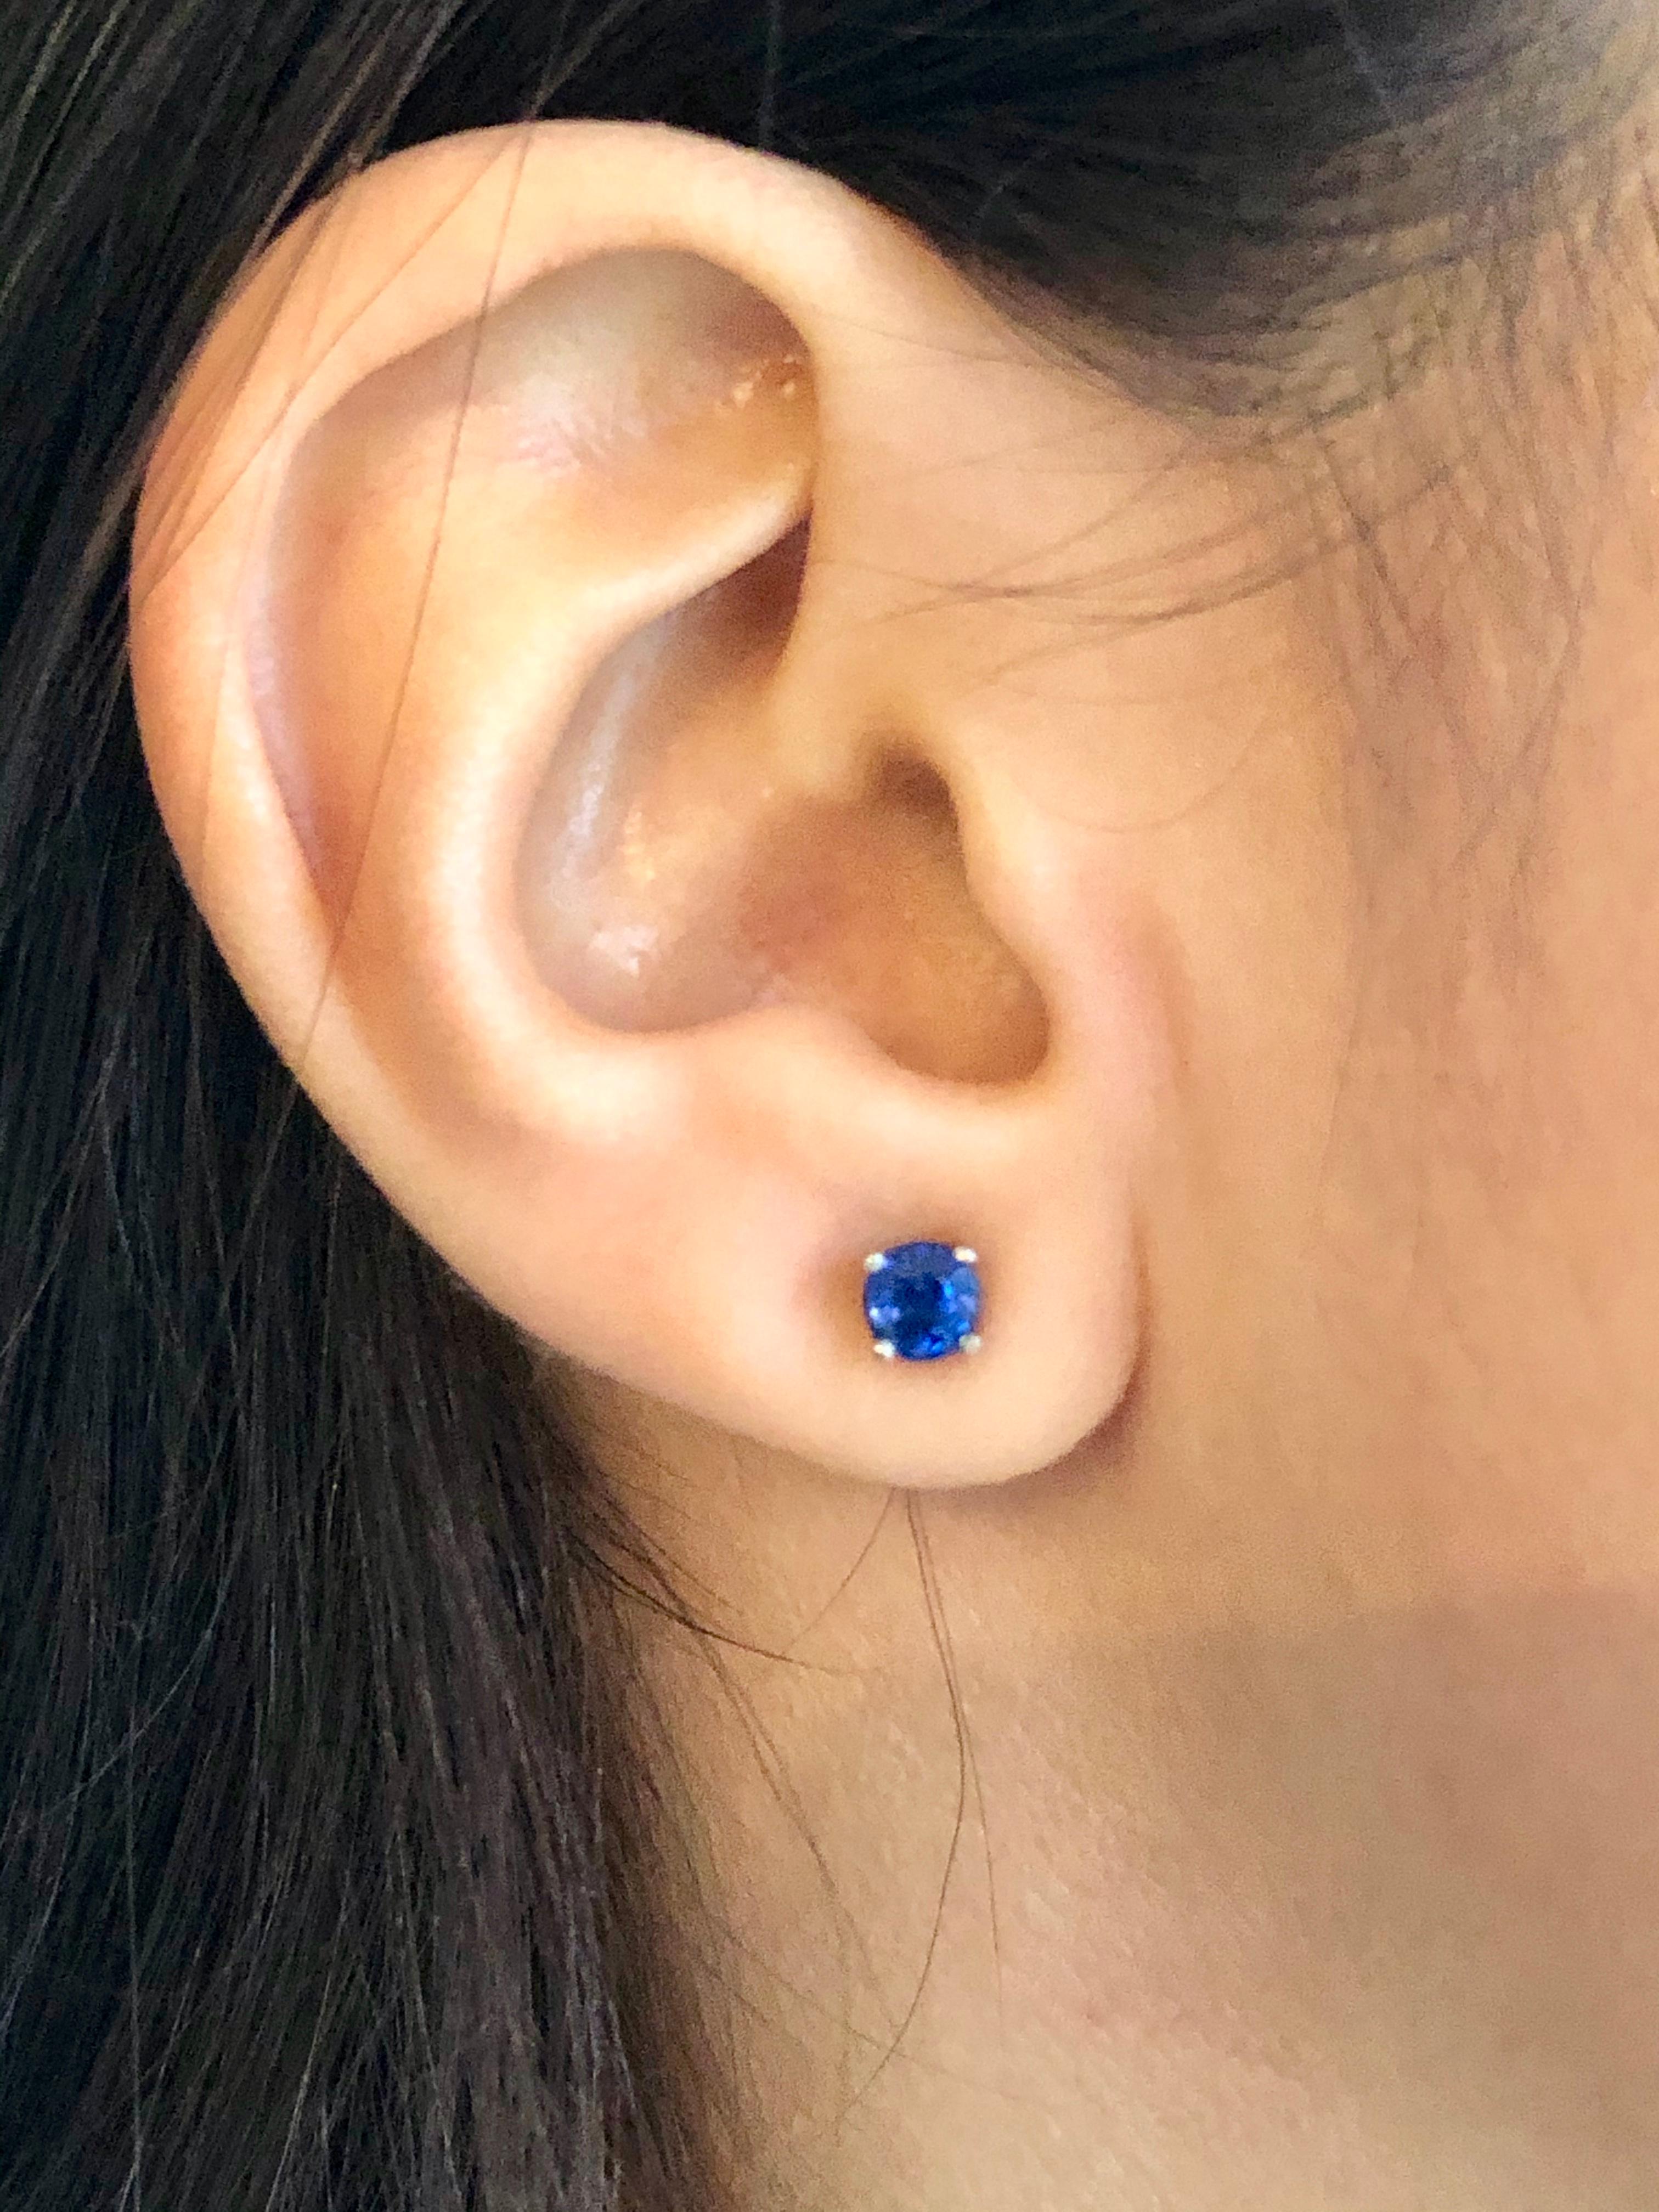 Classic Blue Sapphire Platinum Stud Earrings
Platinum stud earrings set with two round blue sapphires weighing 1.10 carat
Dimensions: Approx. 5mm
New /Excellent condition.
**Made to order, custom options are available(Yellow, white gold, or